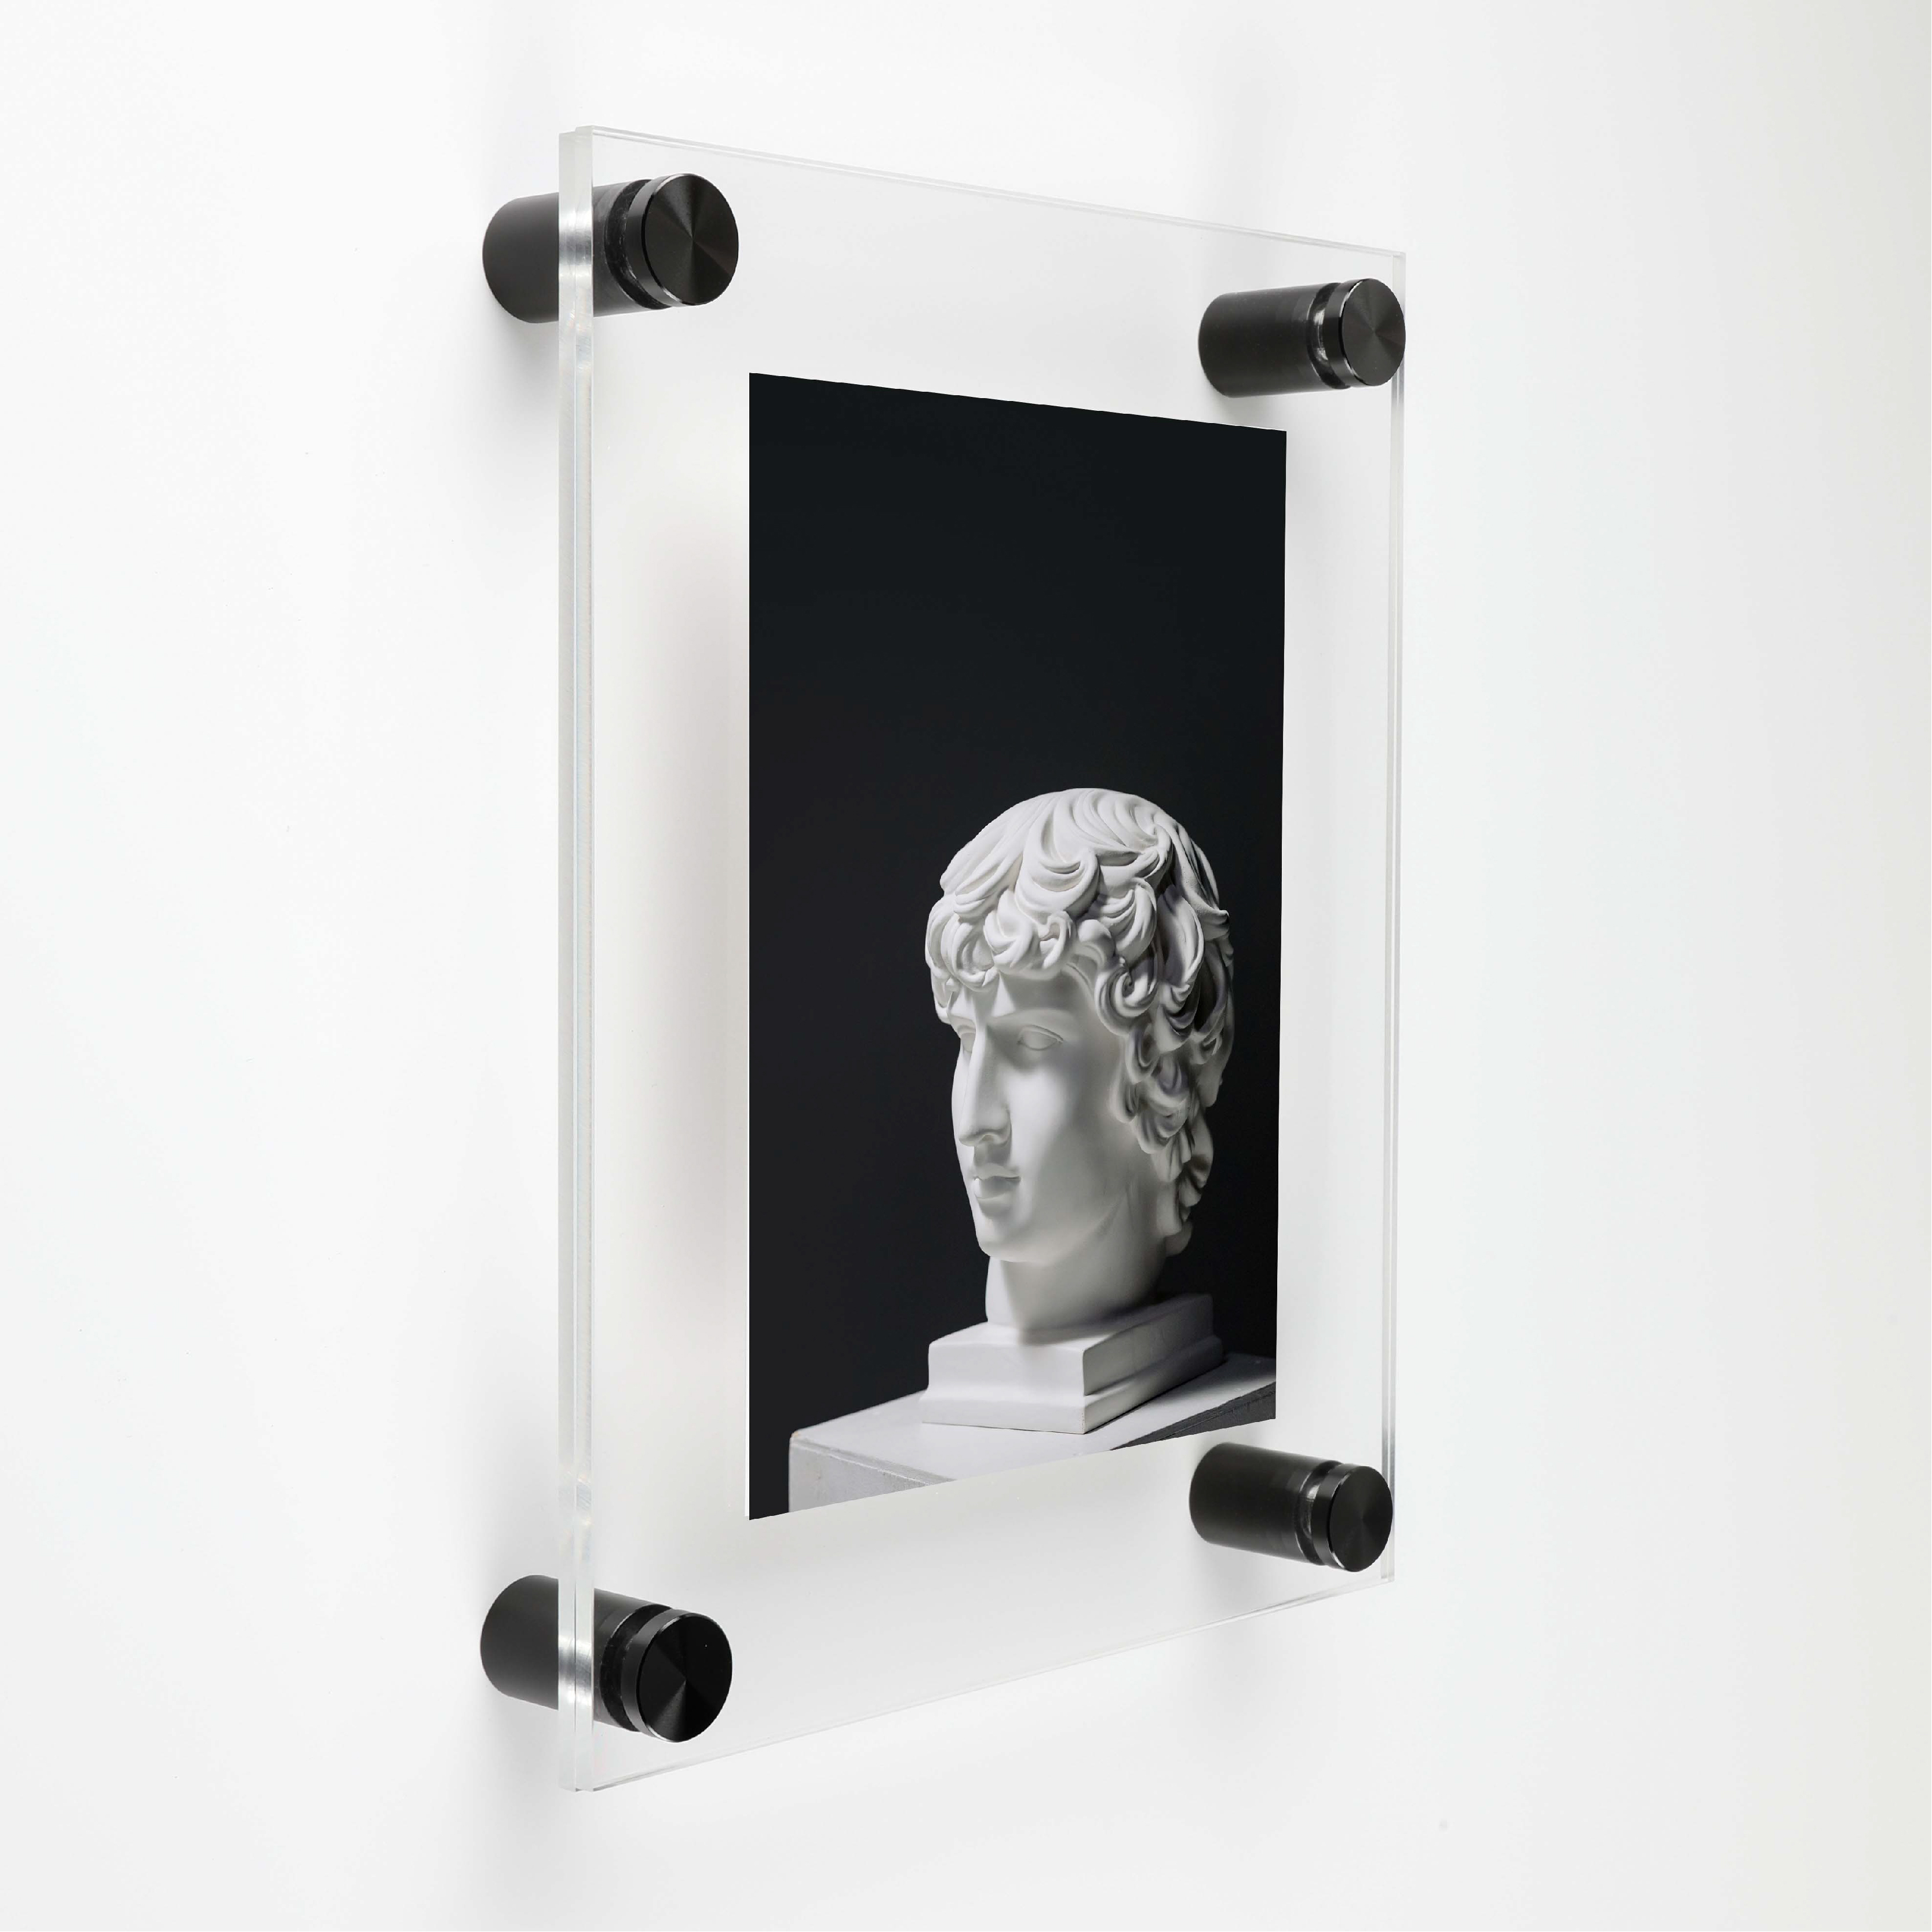 (2) 23-3/4'' x 29-3/4'' Clear Acrylics , Pre-Drilled With Polished Edges (Thick 3/16'' each), Wall Frame with (4) 3/4'' x 1'' Black Anodized Aluminum Standoffs includes Screws and Anchors